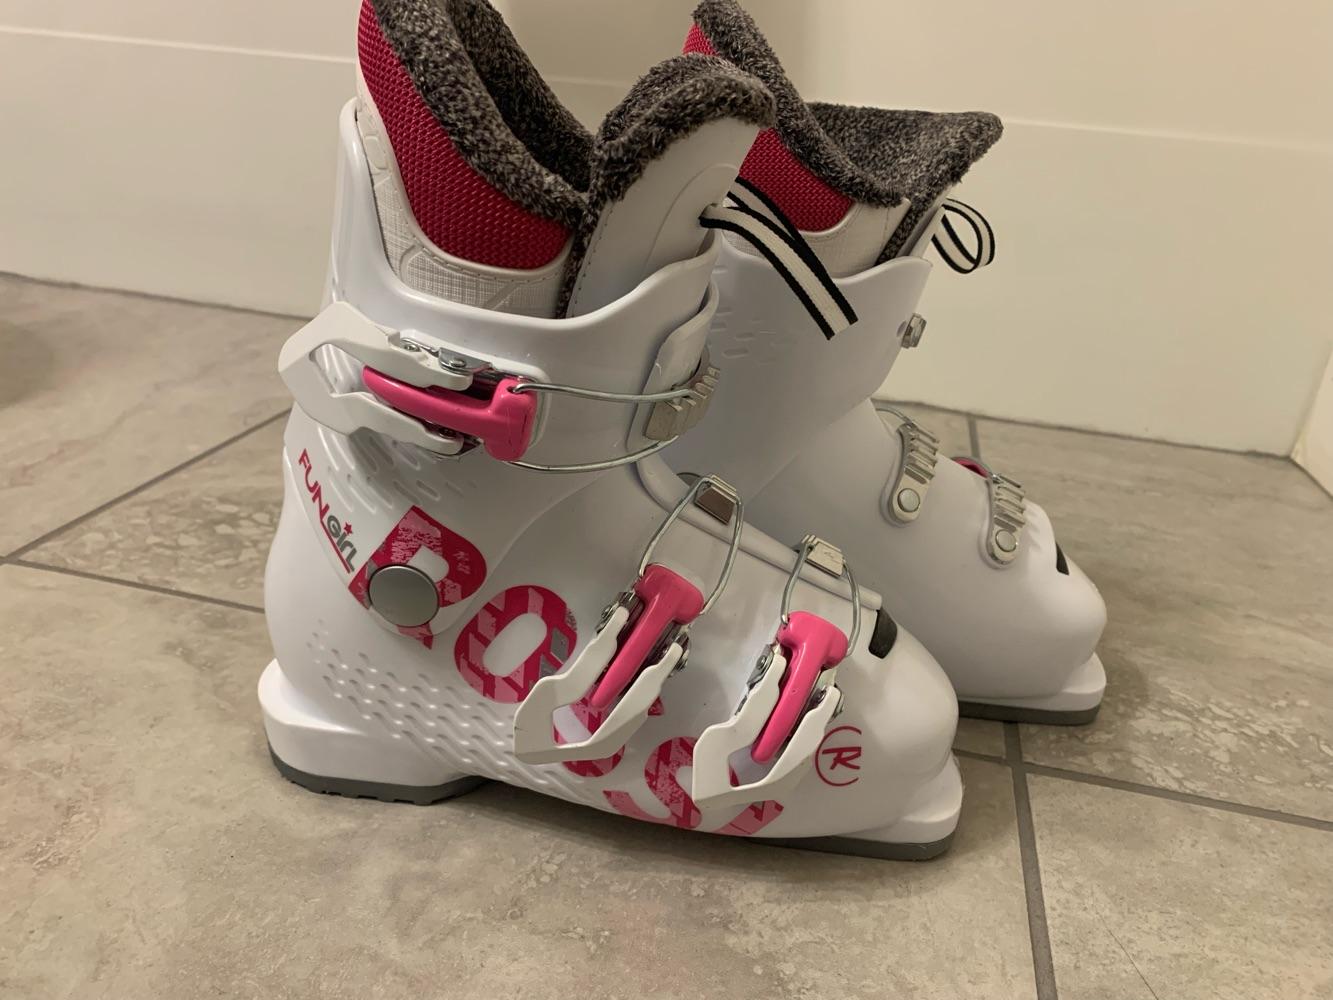 Rossignol pink and white snowboard boots size 205/ 245mm